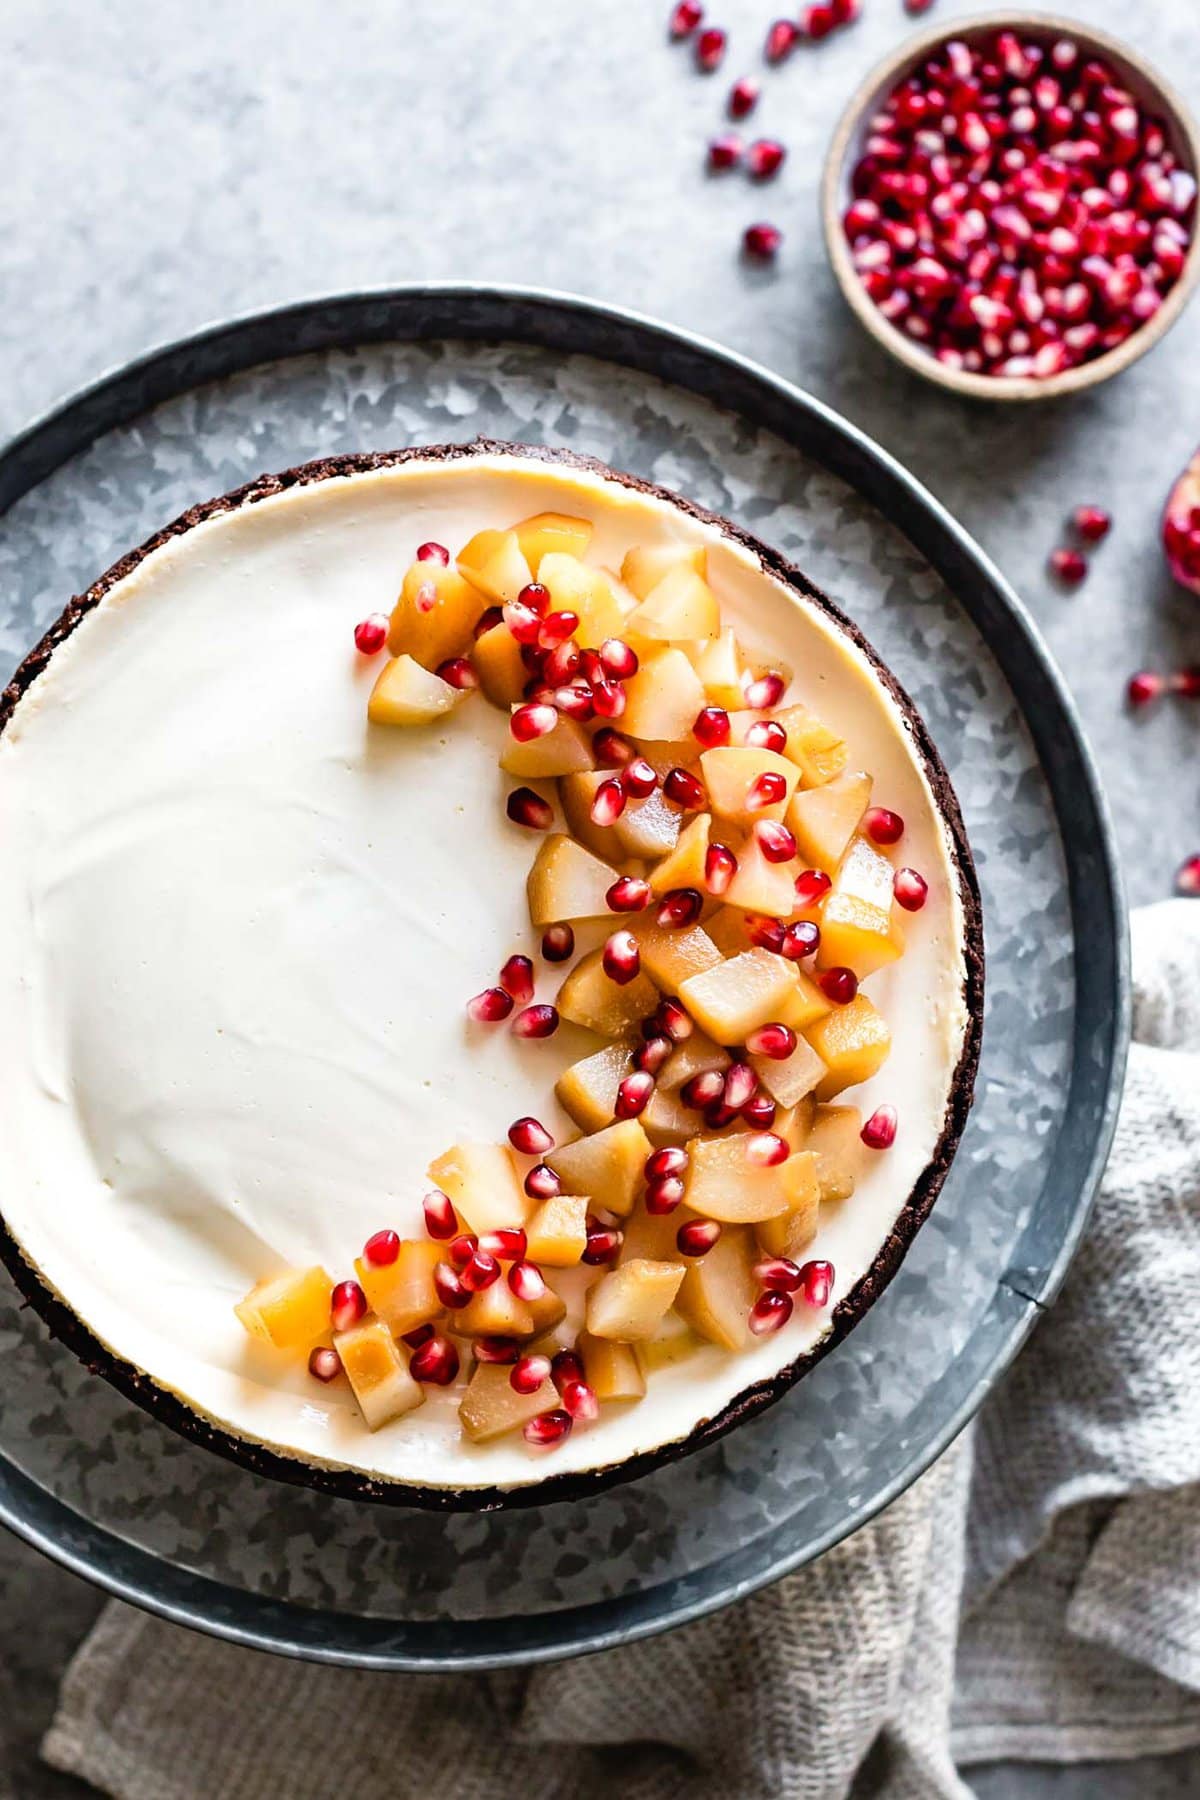 the baked cheesecake has been topped with poached pear chunks and pomegranate arils in a half moon pattern